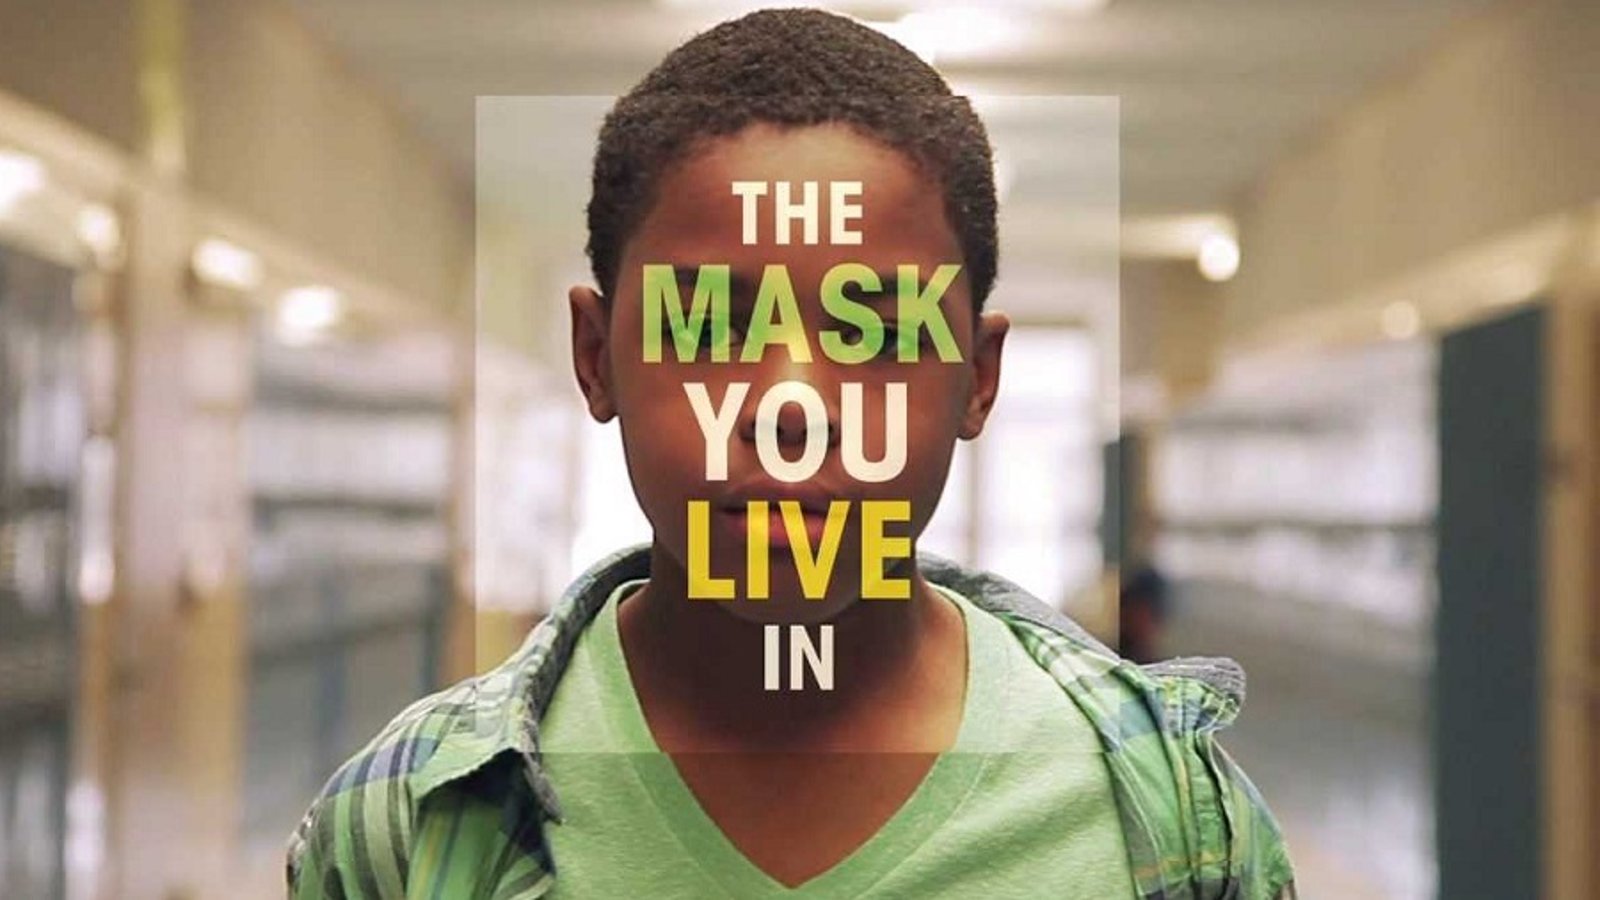 The Mask You Live In